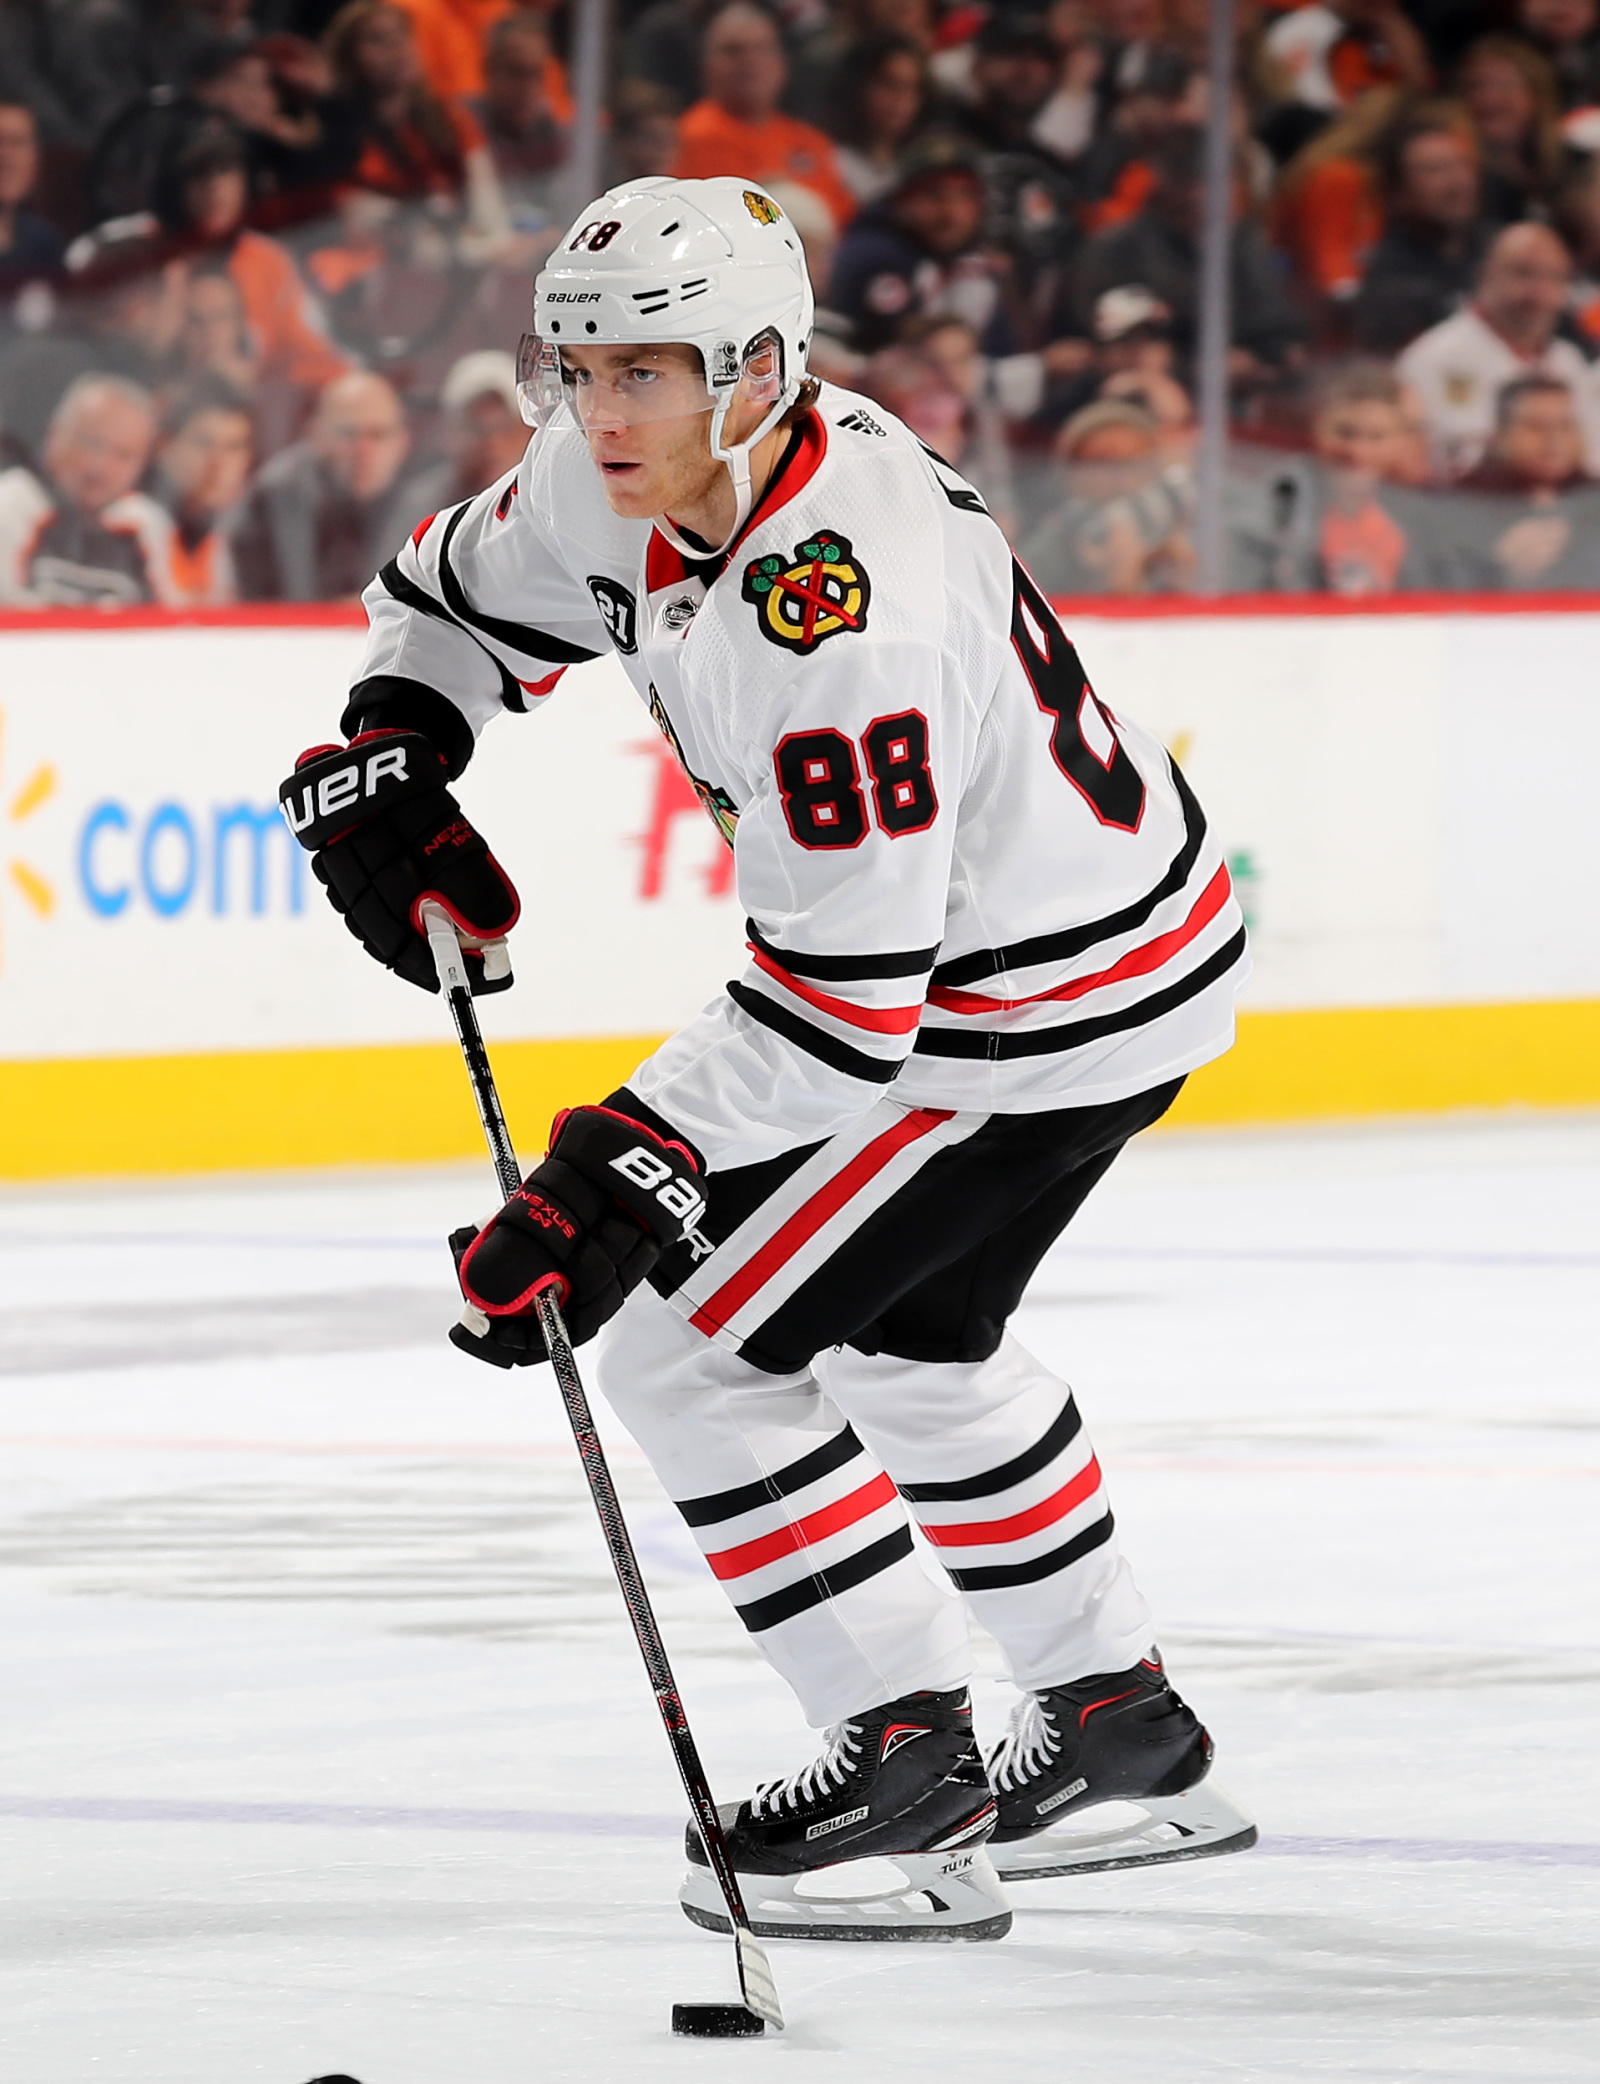 Chicago Blackhawks' Patrick Kane And Debate Over Him Wearing “A”